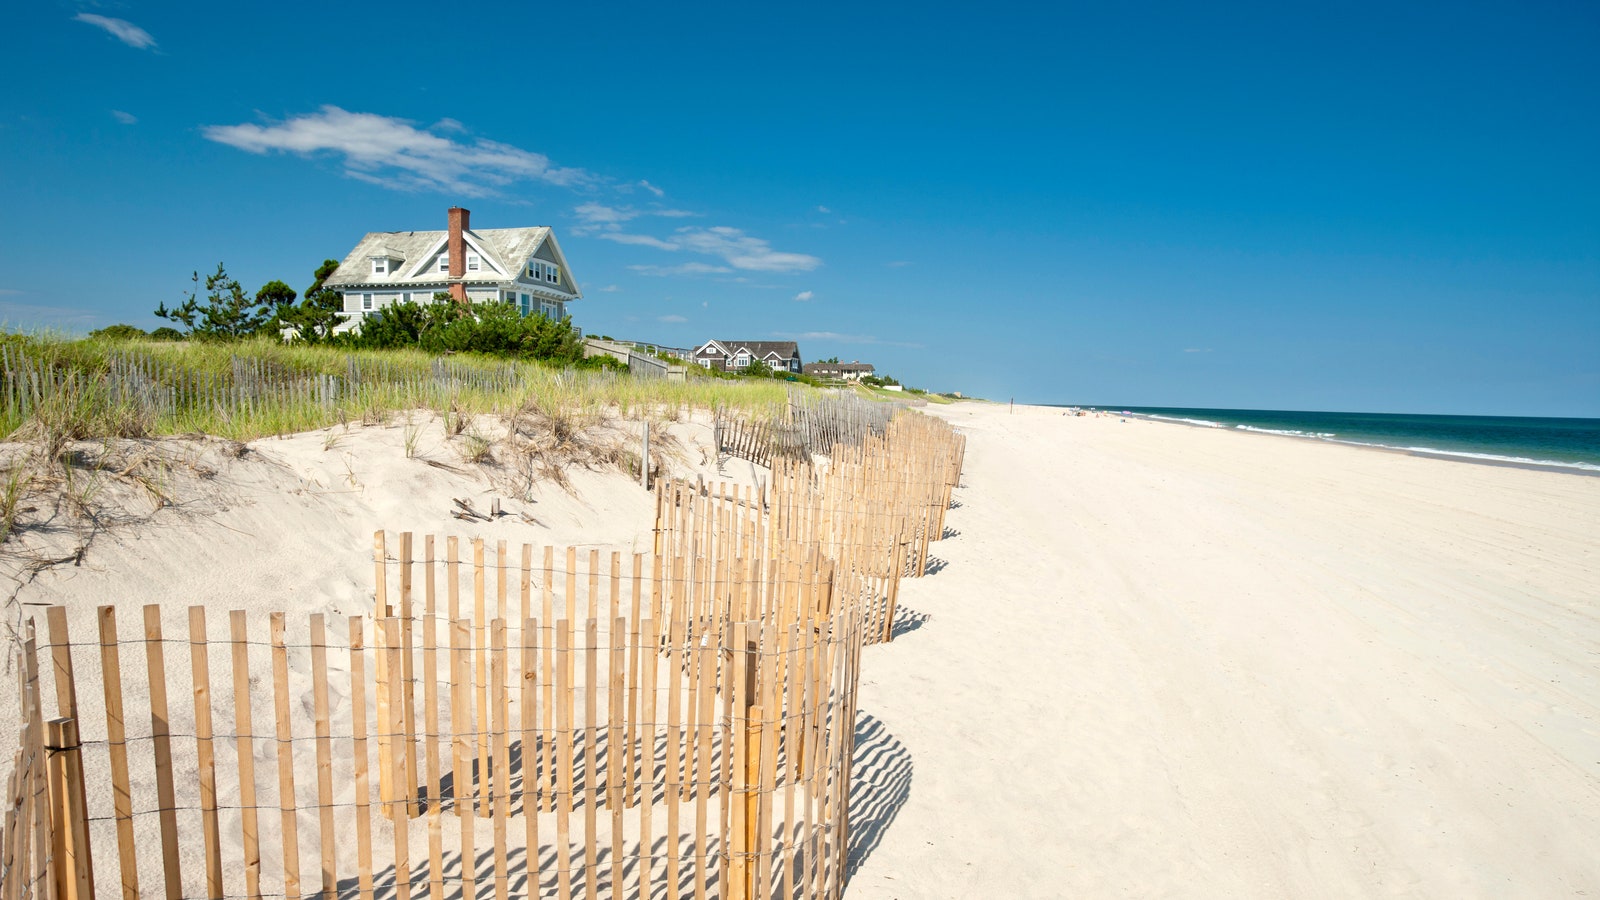 House & Garden's guide to the Hamptons